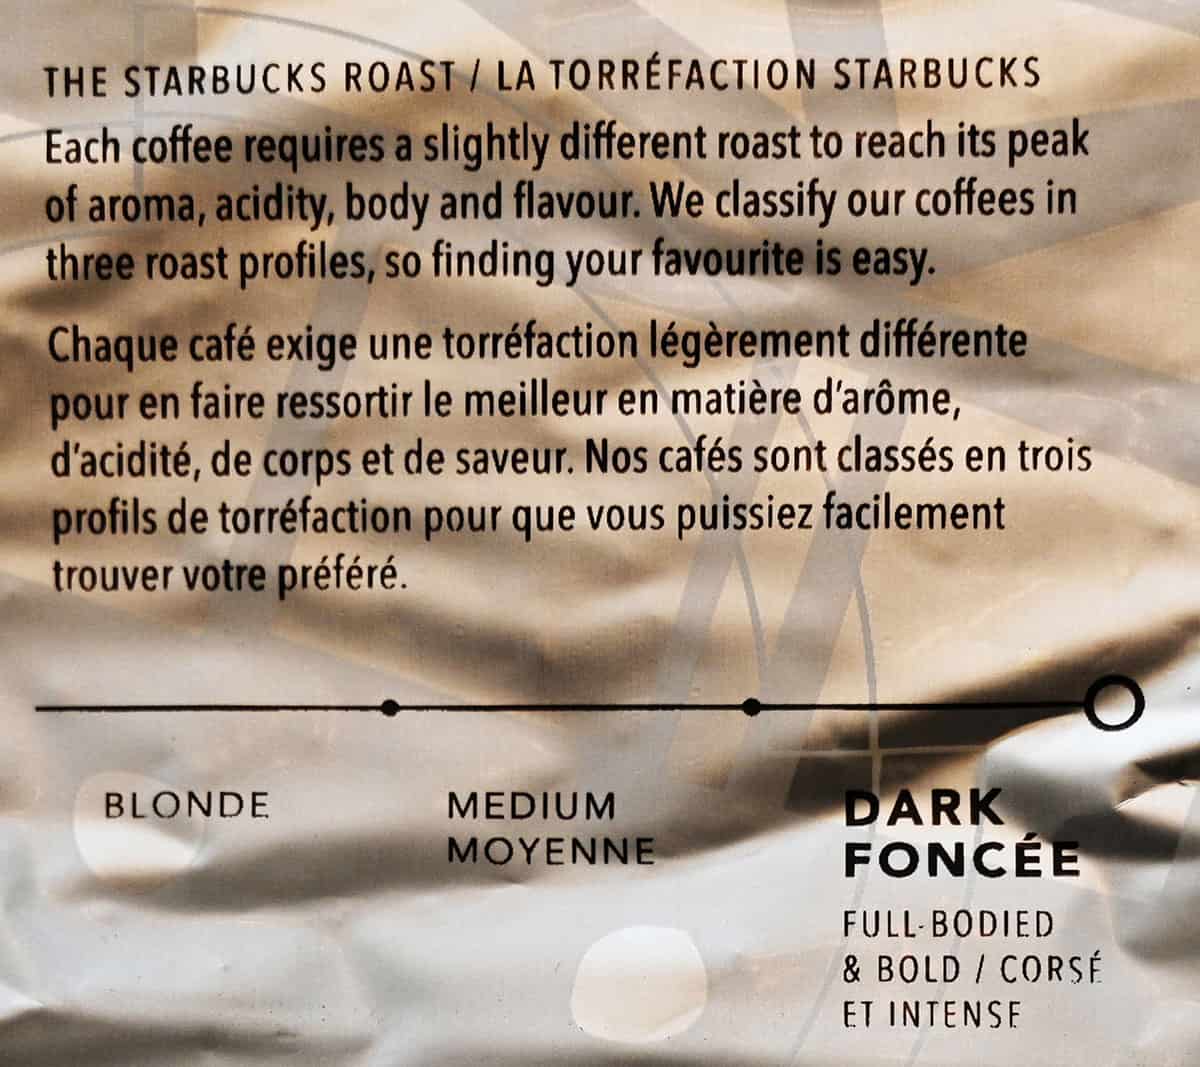 Image of the roast description explanation from the bag - Starbucks has three different roasts, blonde, medium and dark.